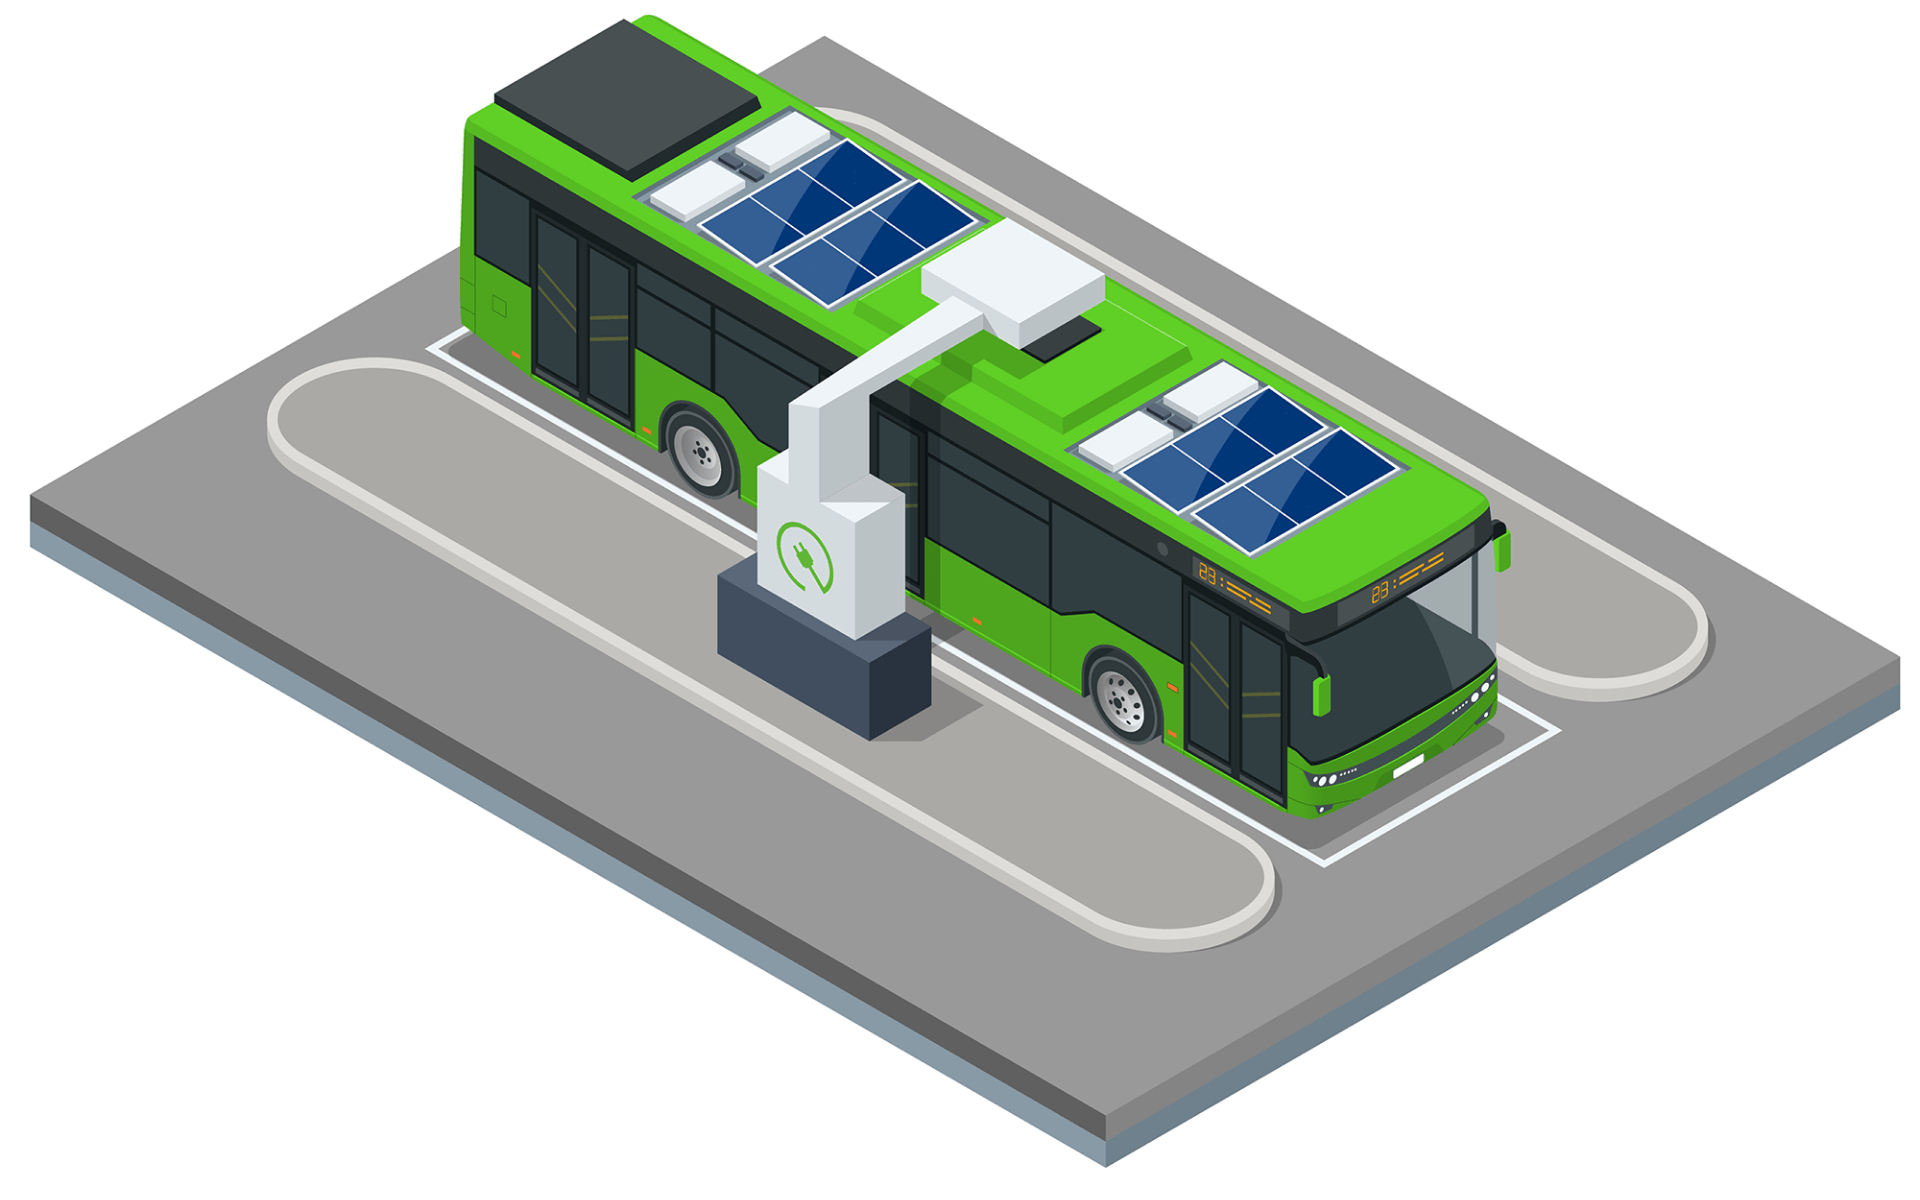 Eco-friendly green bus featuring solar panels for sustainable energy.